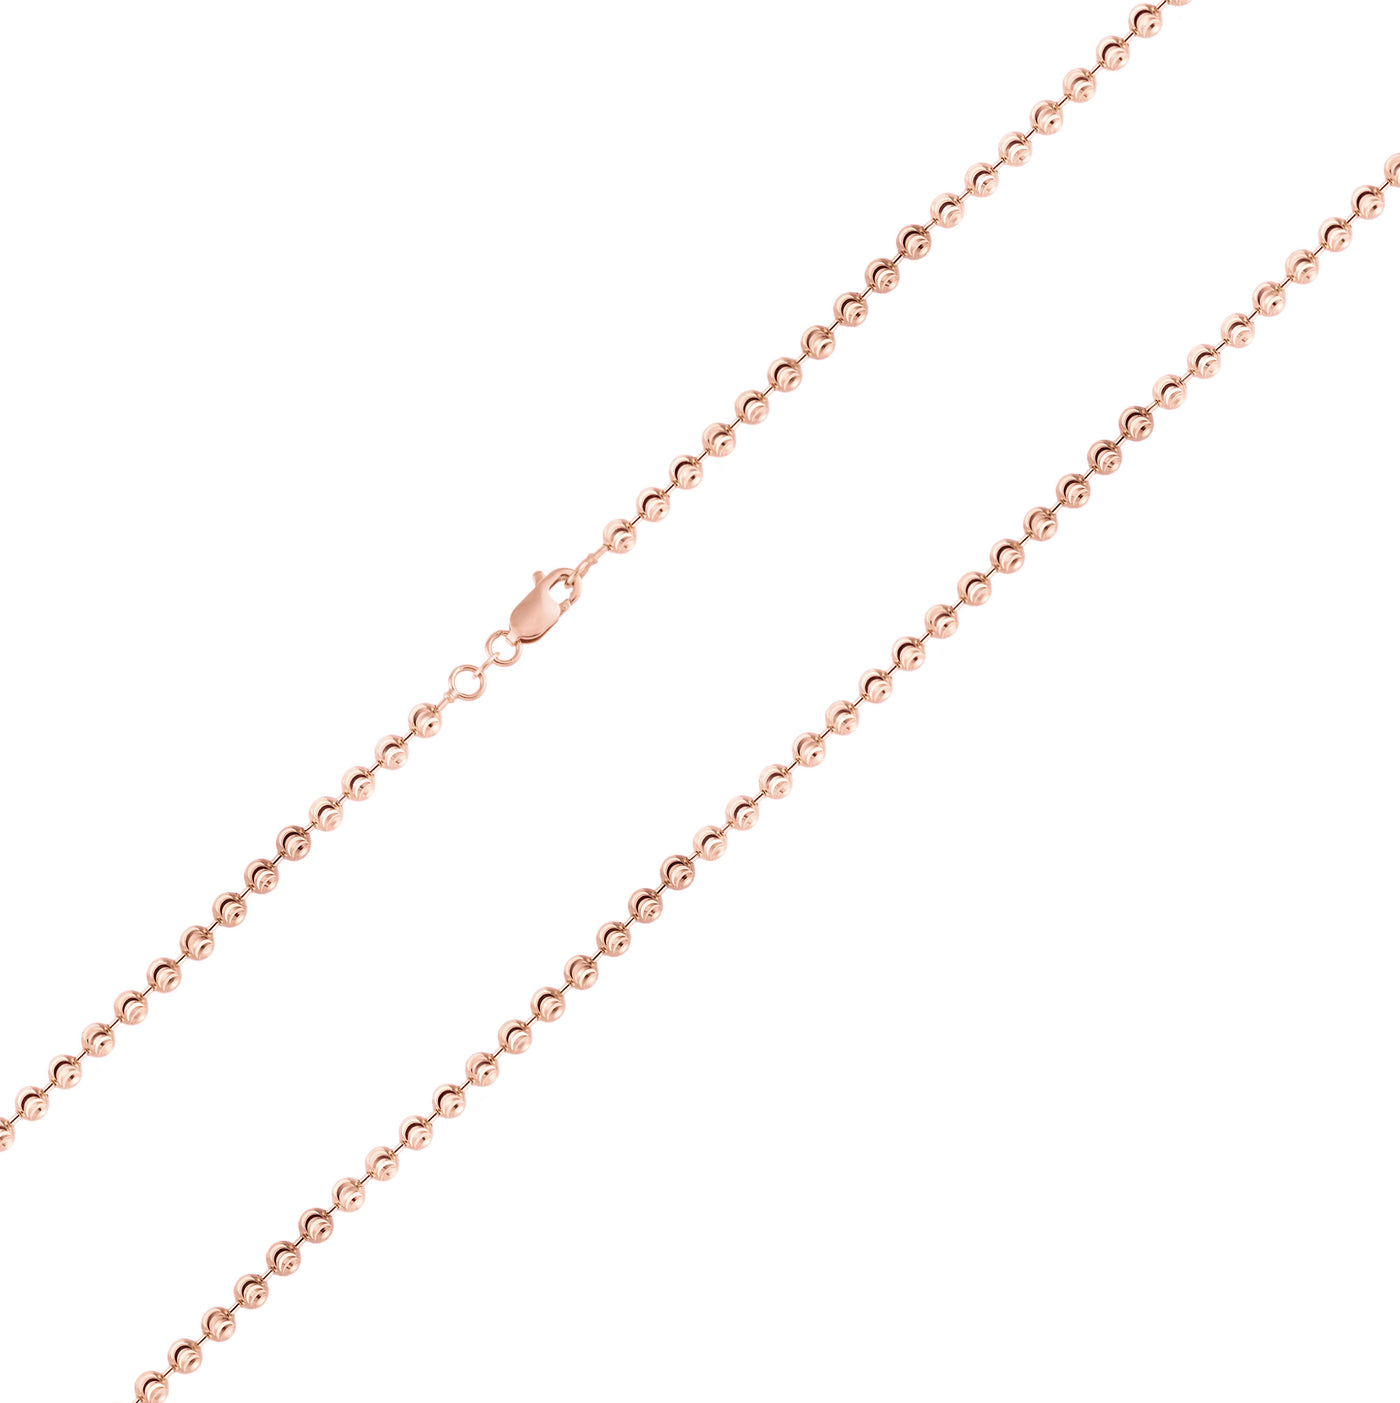 Bead Ball Moon Cut Link Chain Necklace 14K Rose Gold